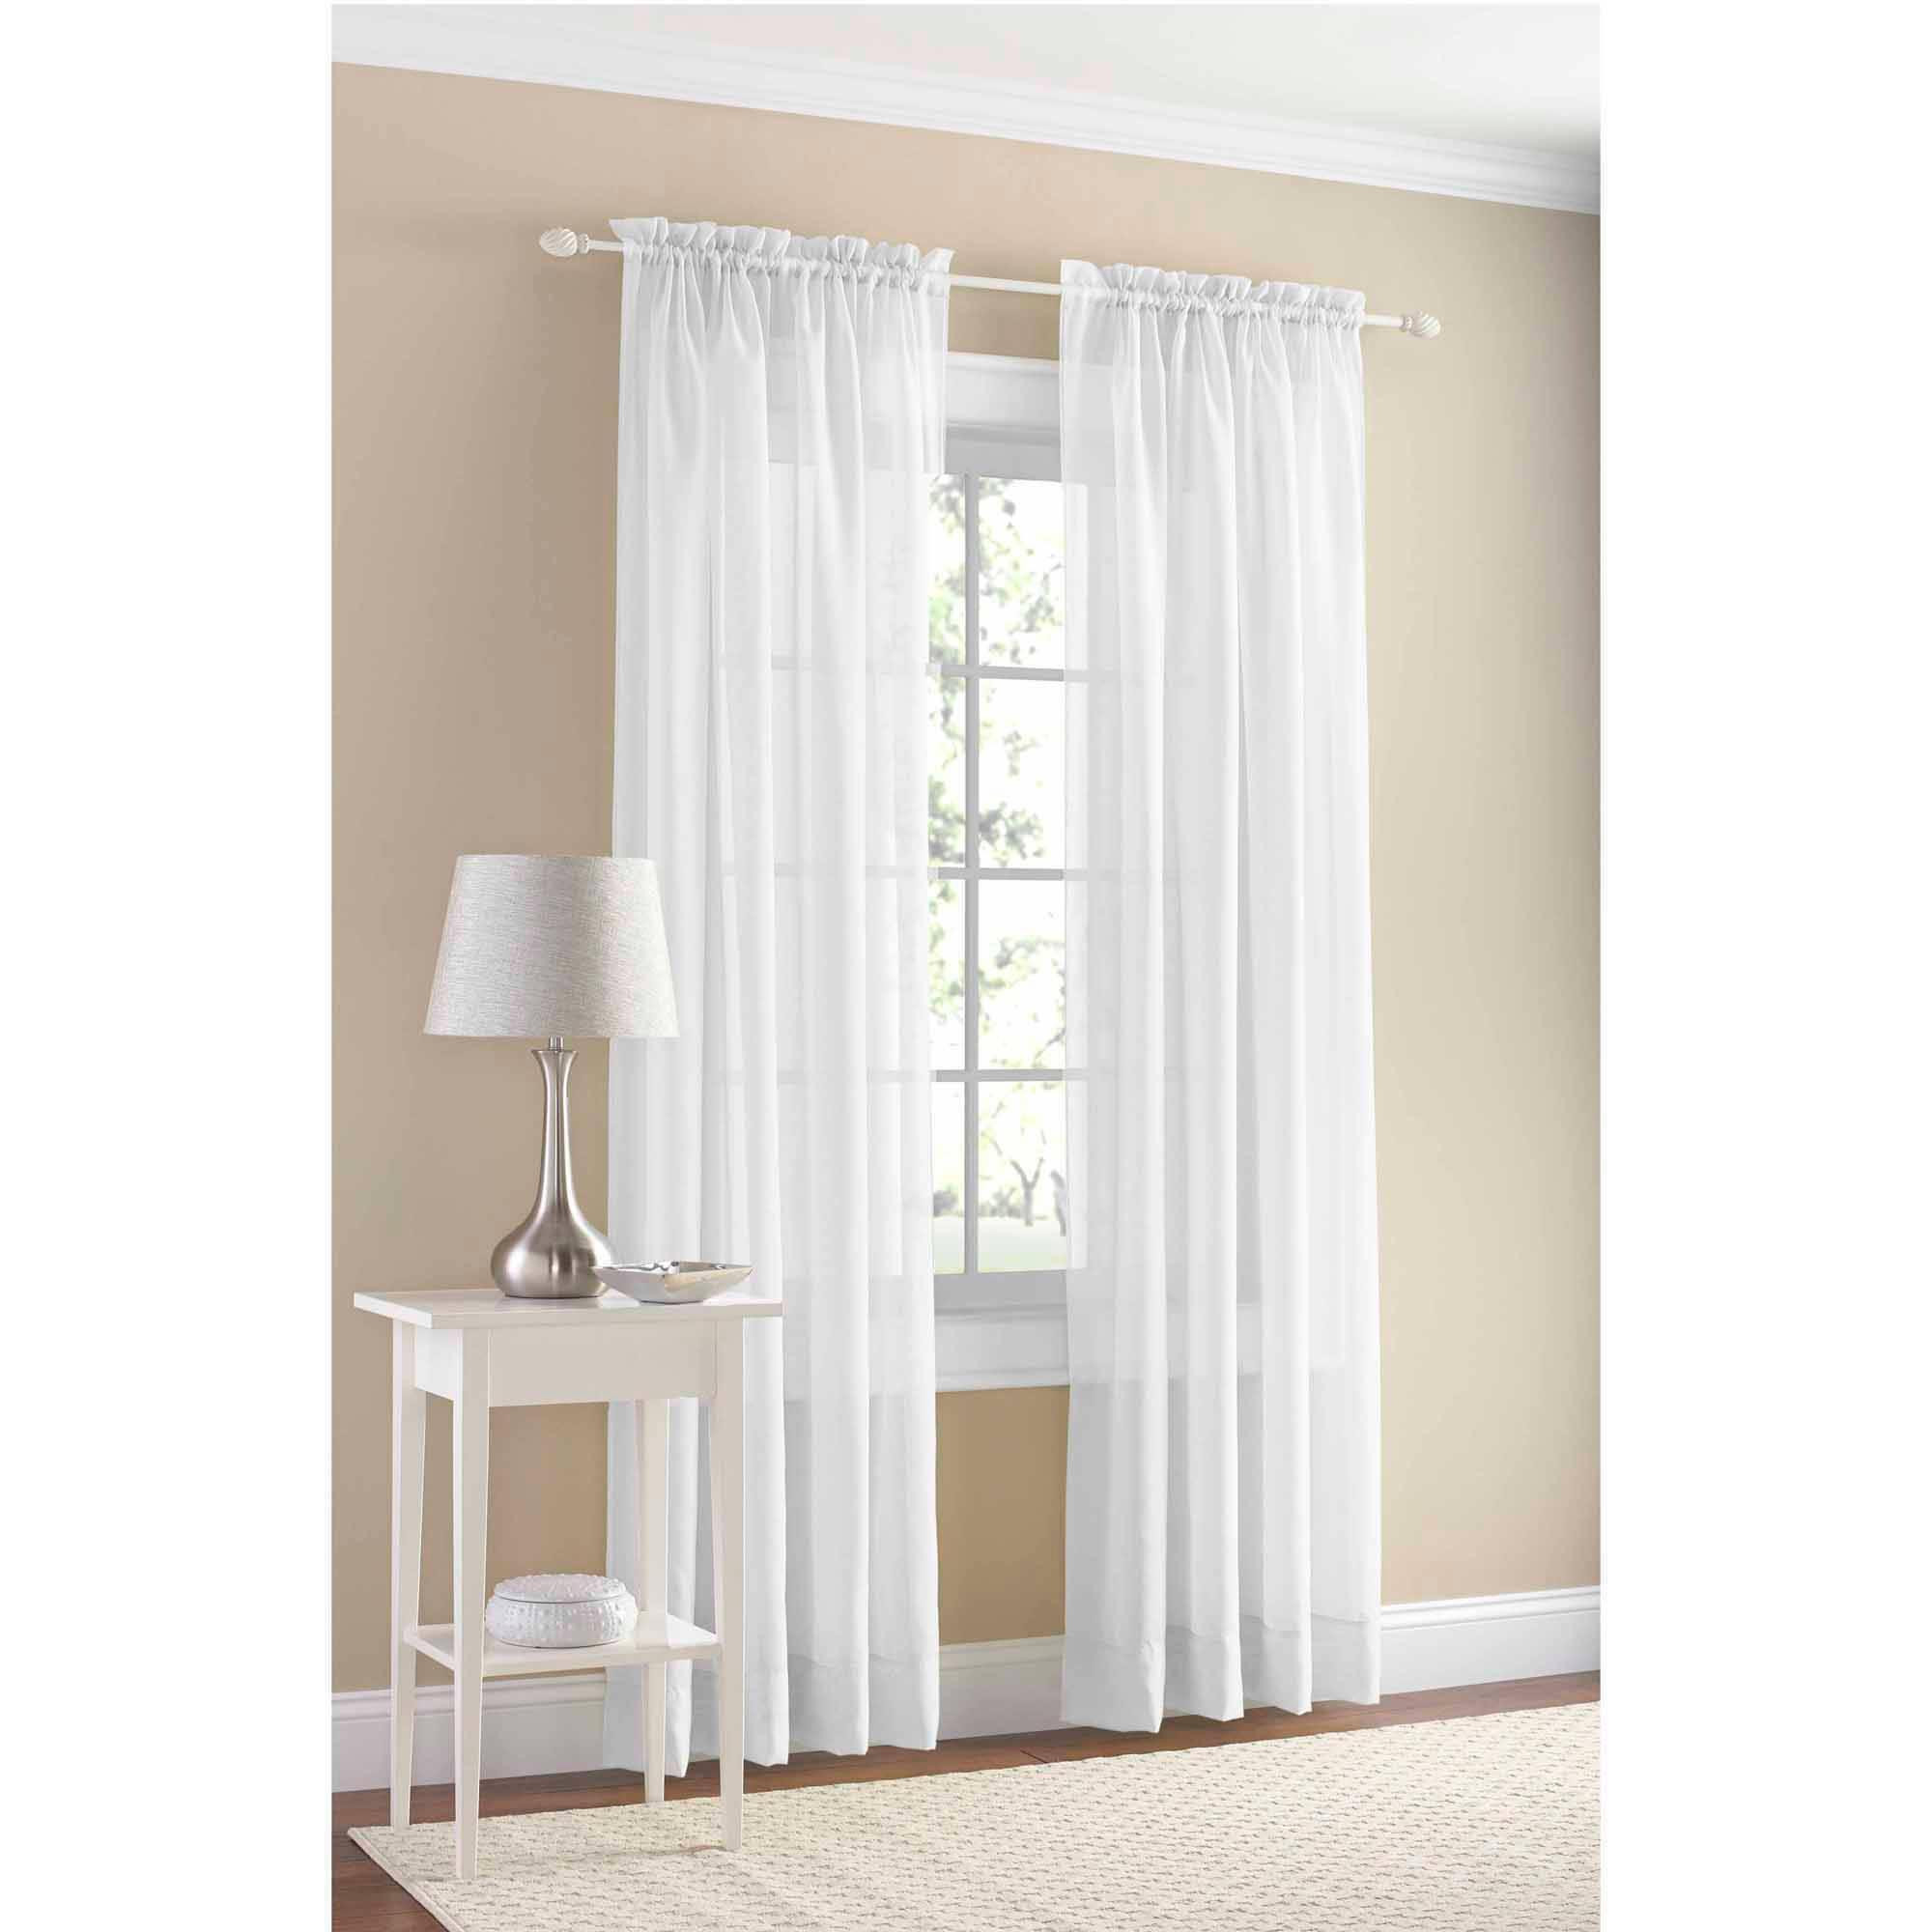 Walmart Curtains For Living Room
 Curtain Curtains At Walmart For Elegant Home Accessories